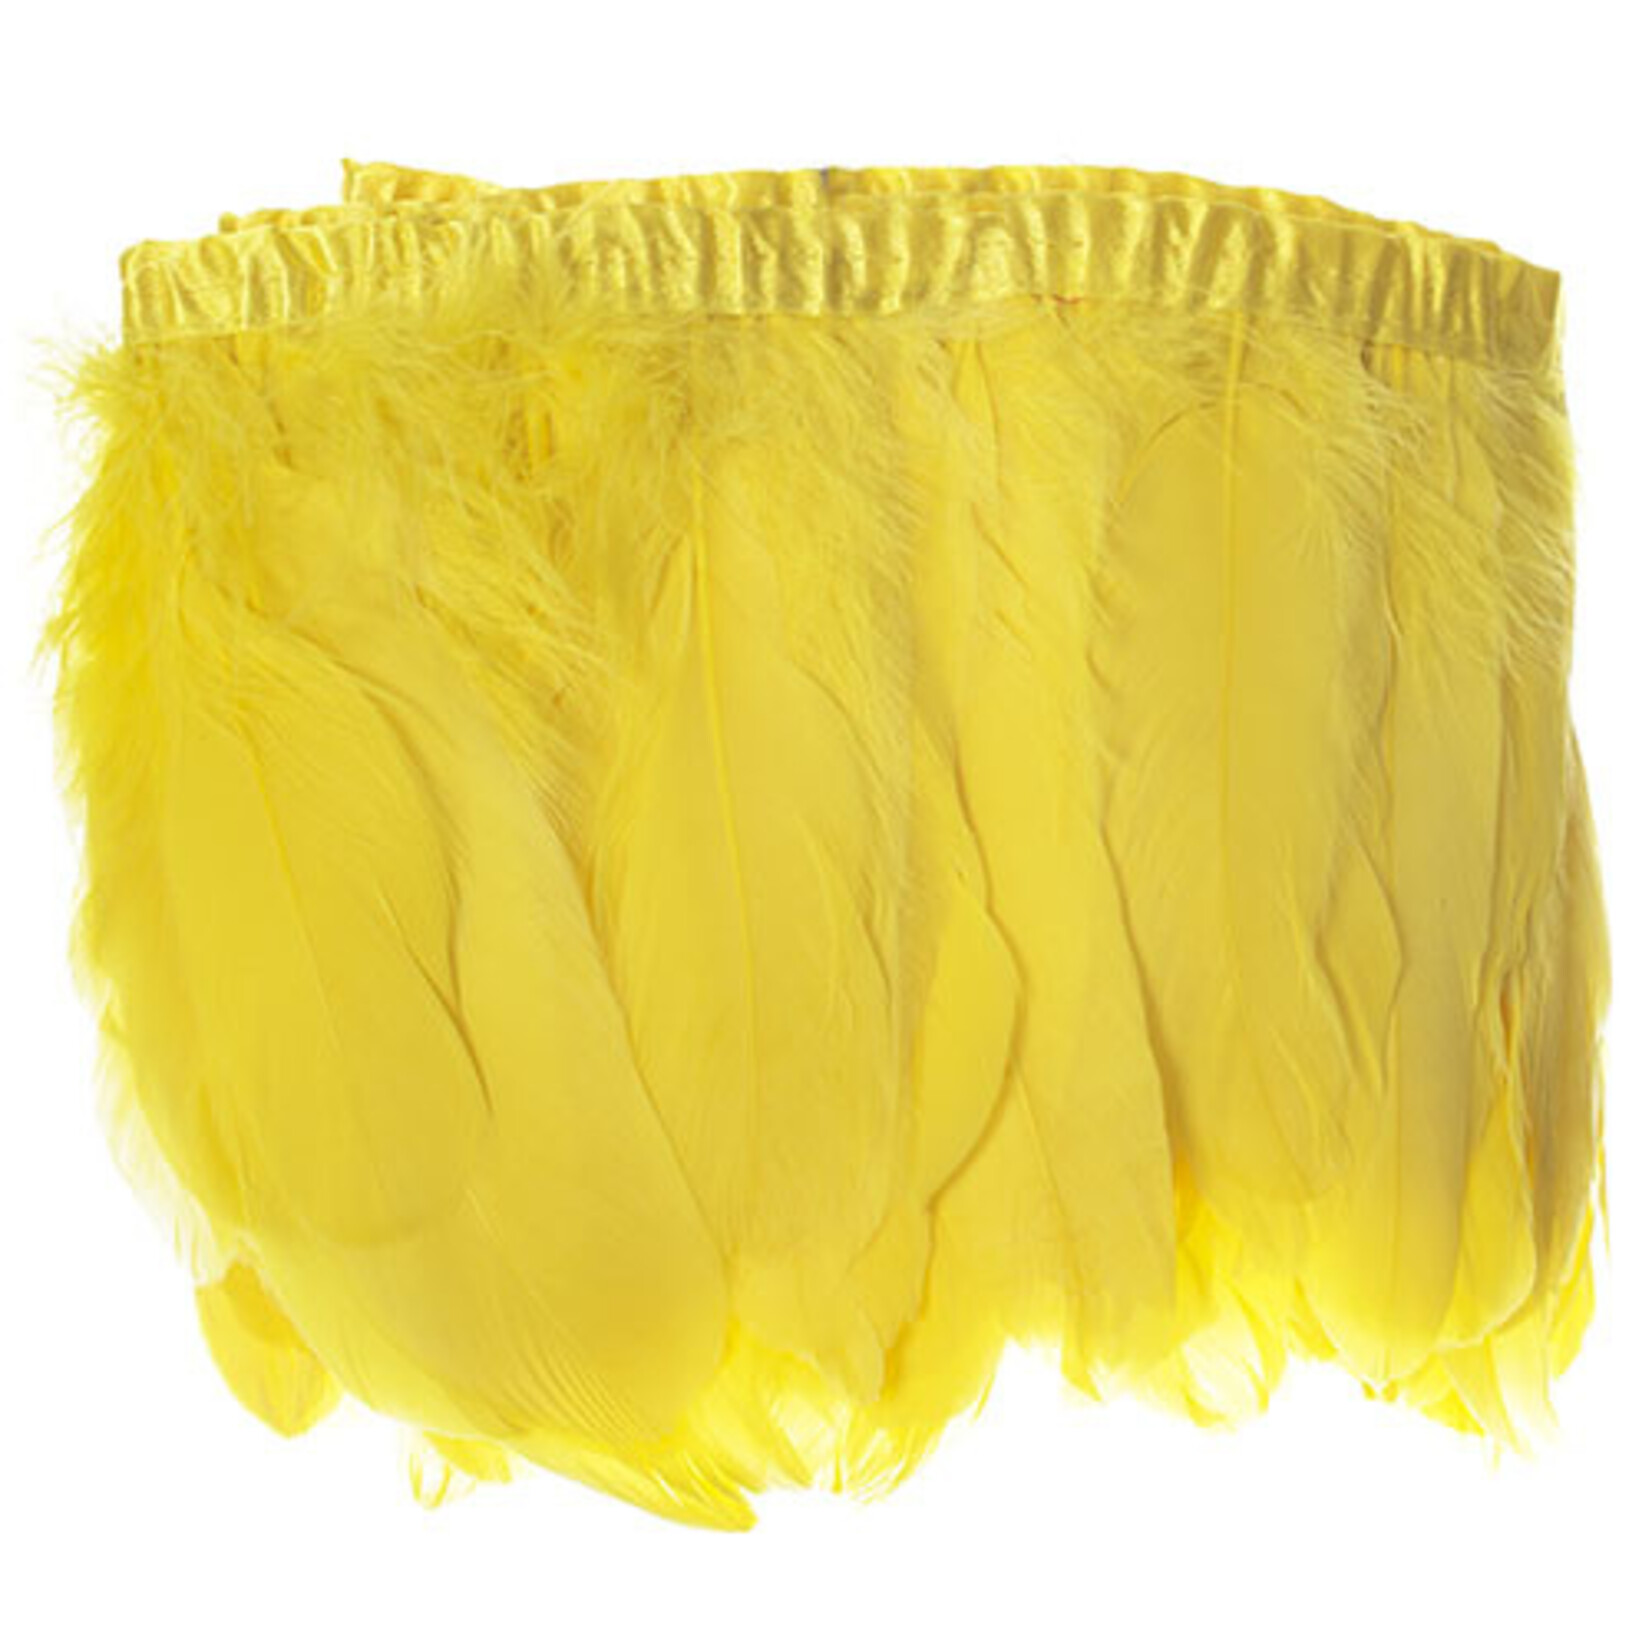 Goose Feather Strung 5.5-7 inches (2 yards) Yellow